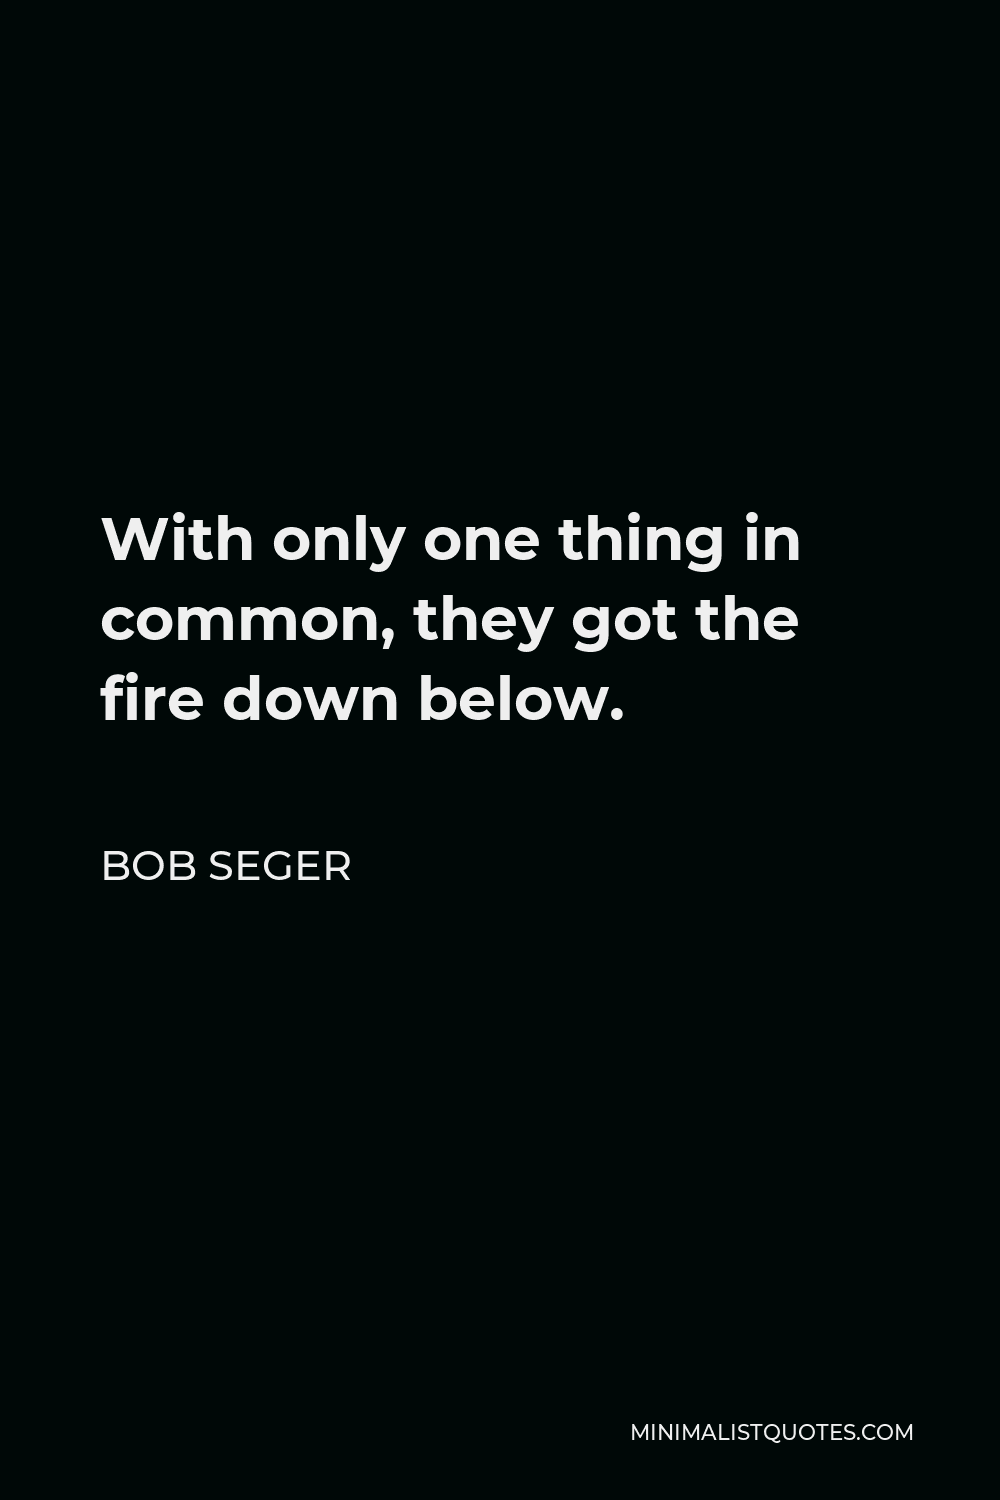 Bob Seger Quote - With only one thing in common, they got the fire down below.